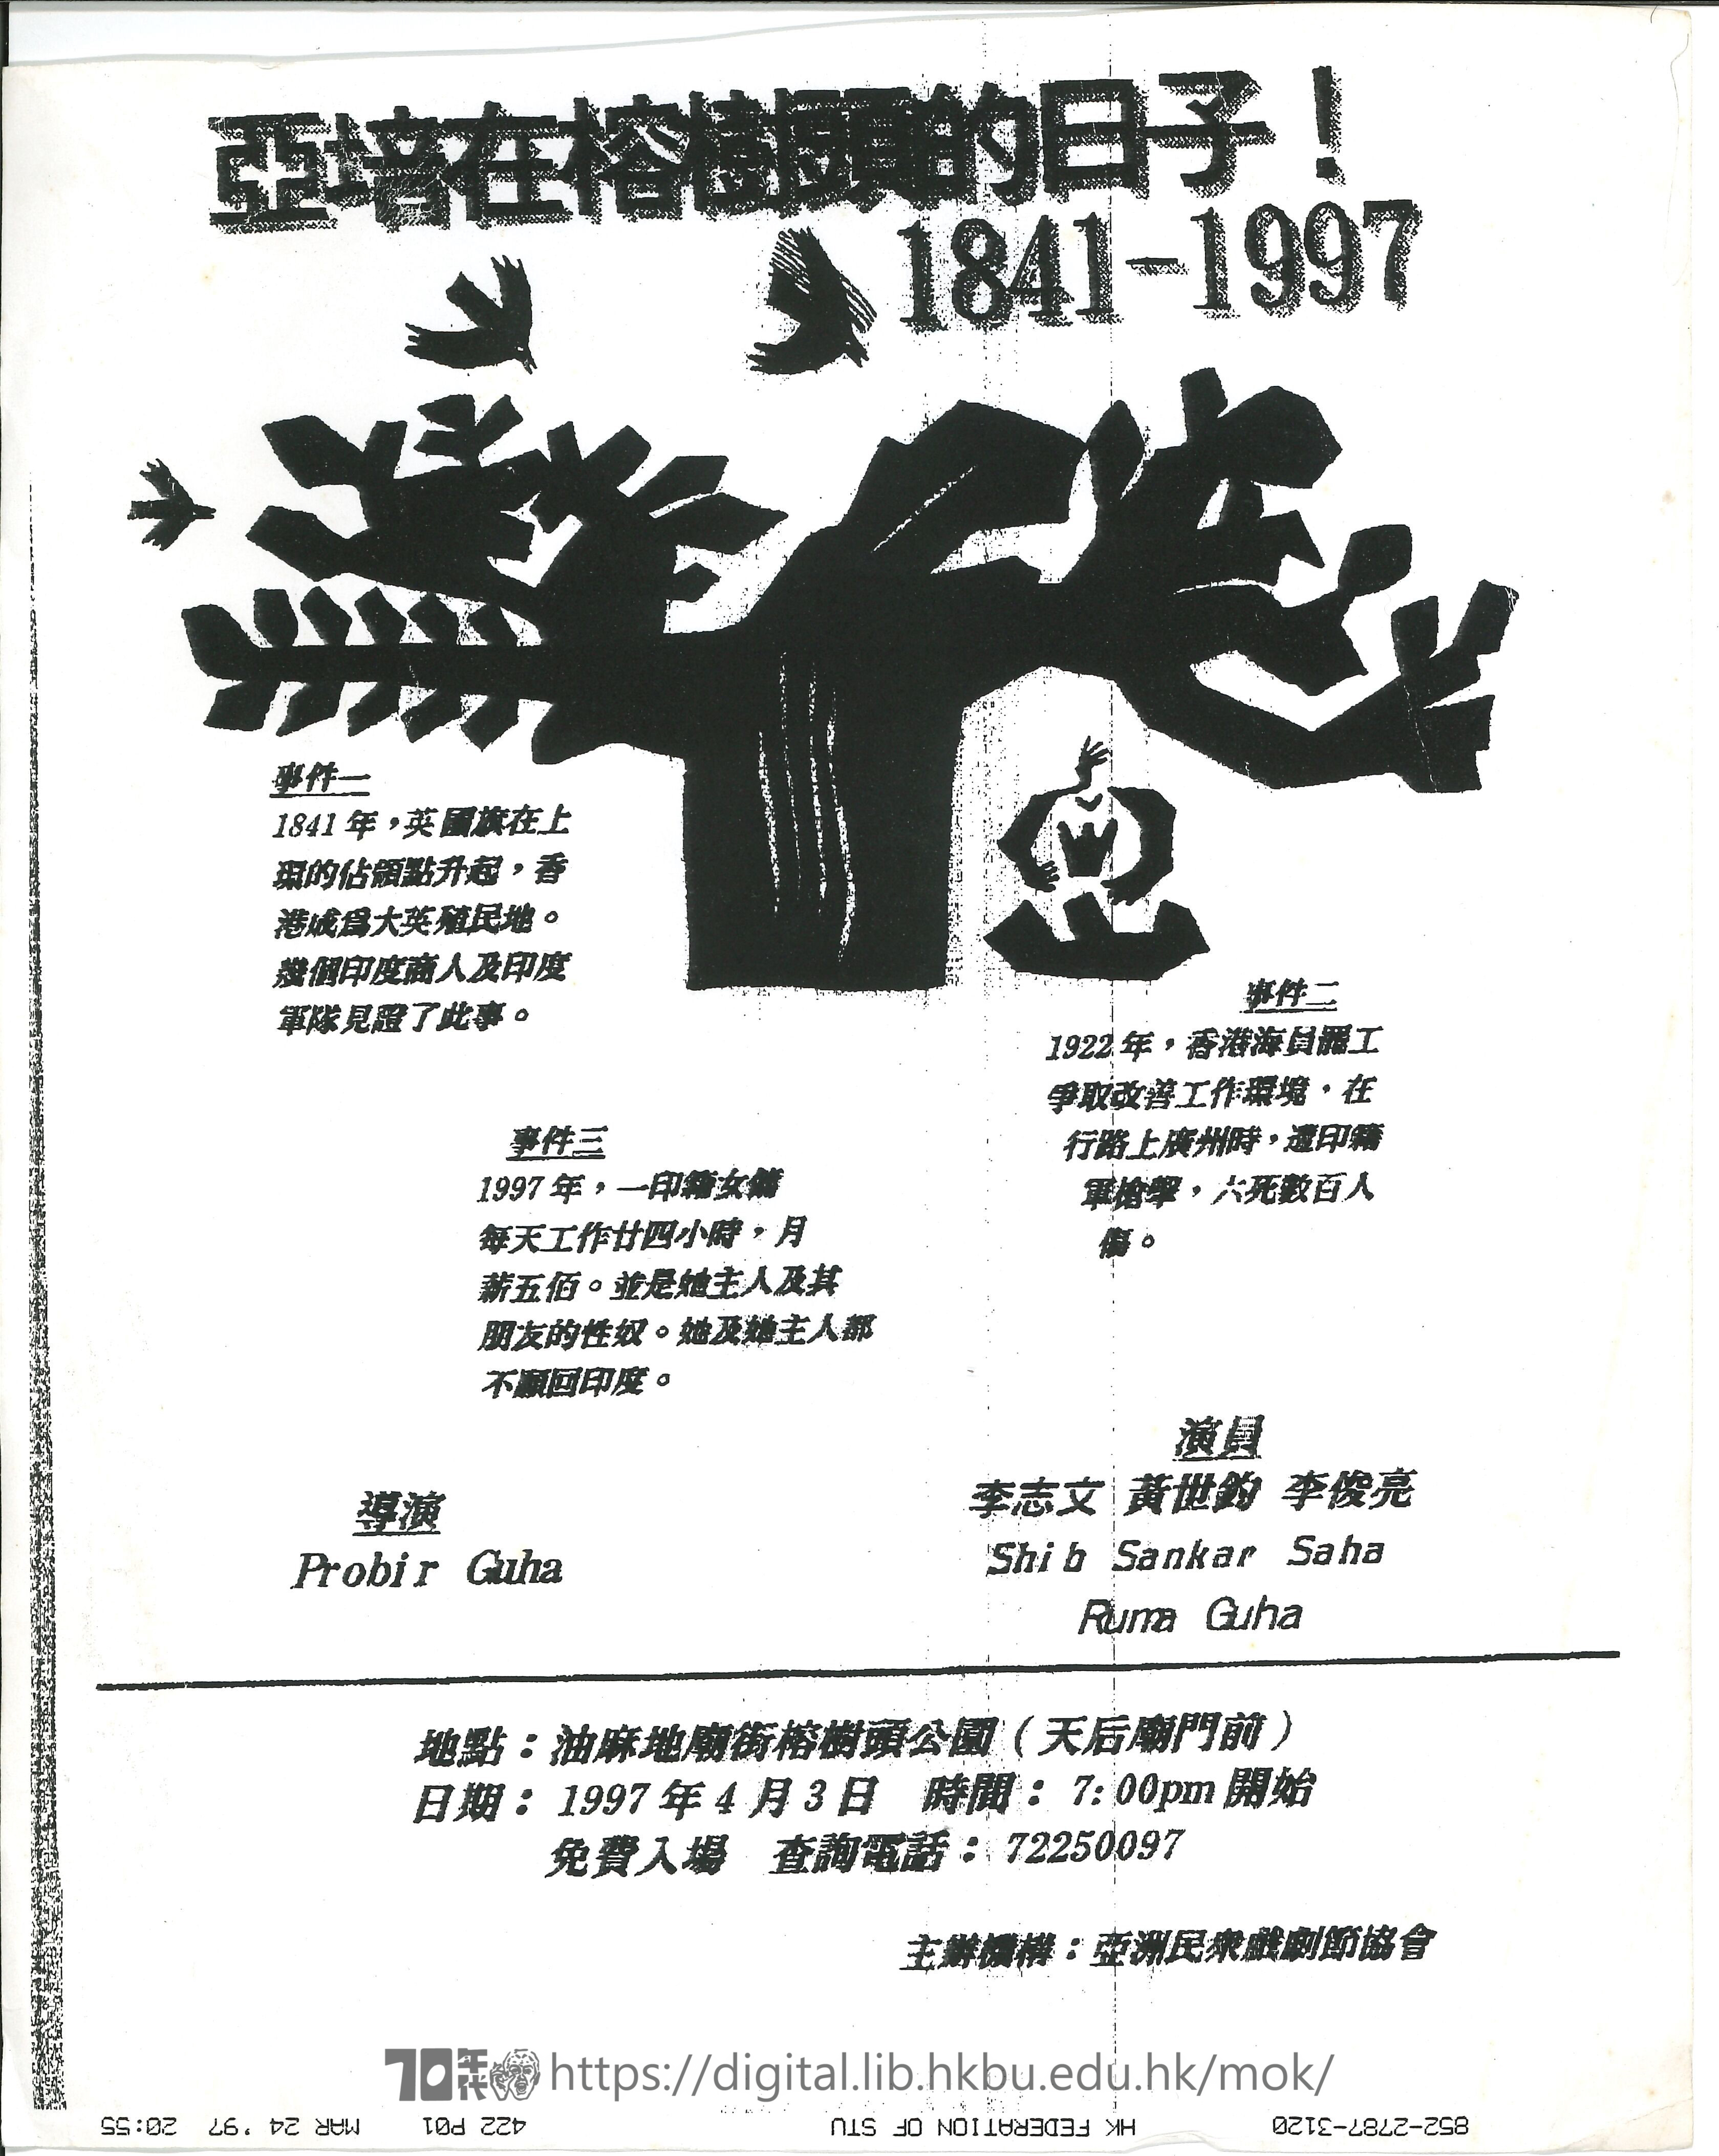 Yours Most Obediently  亞培在榕樹頭的日子！1841-1997 宣傳單張  